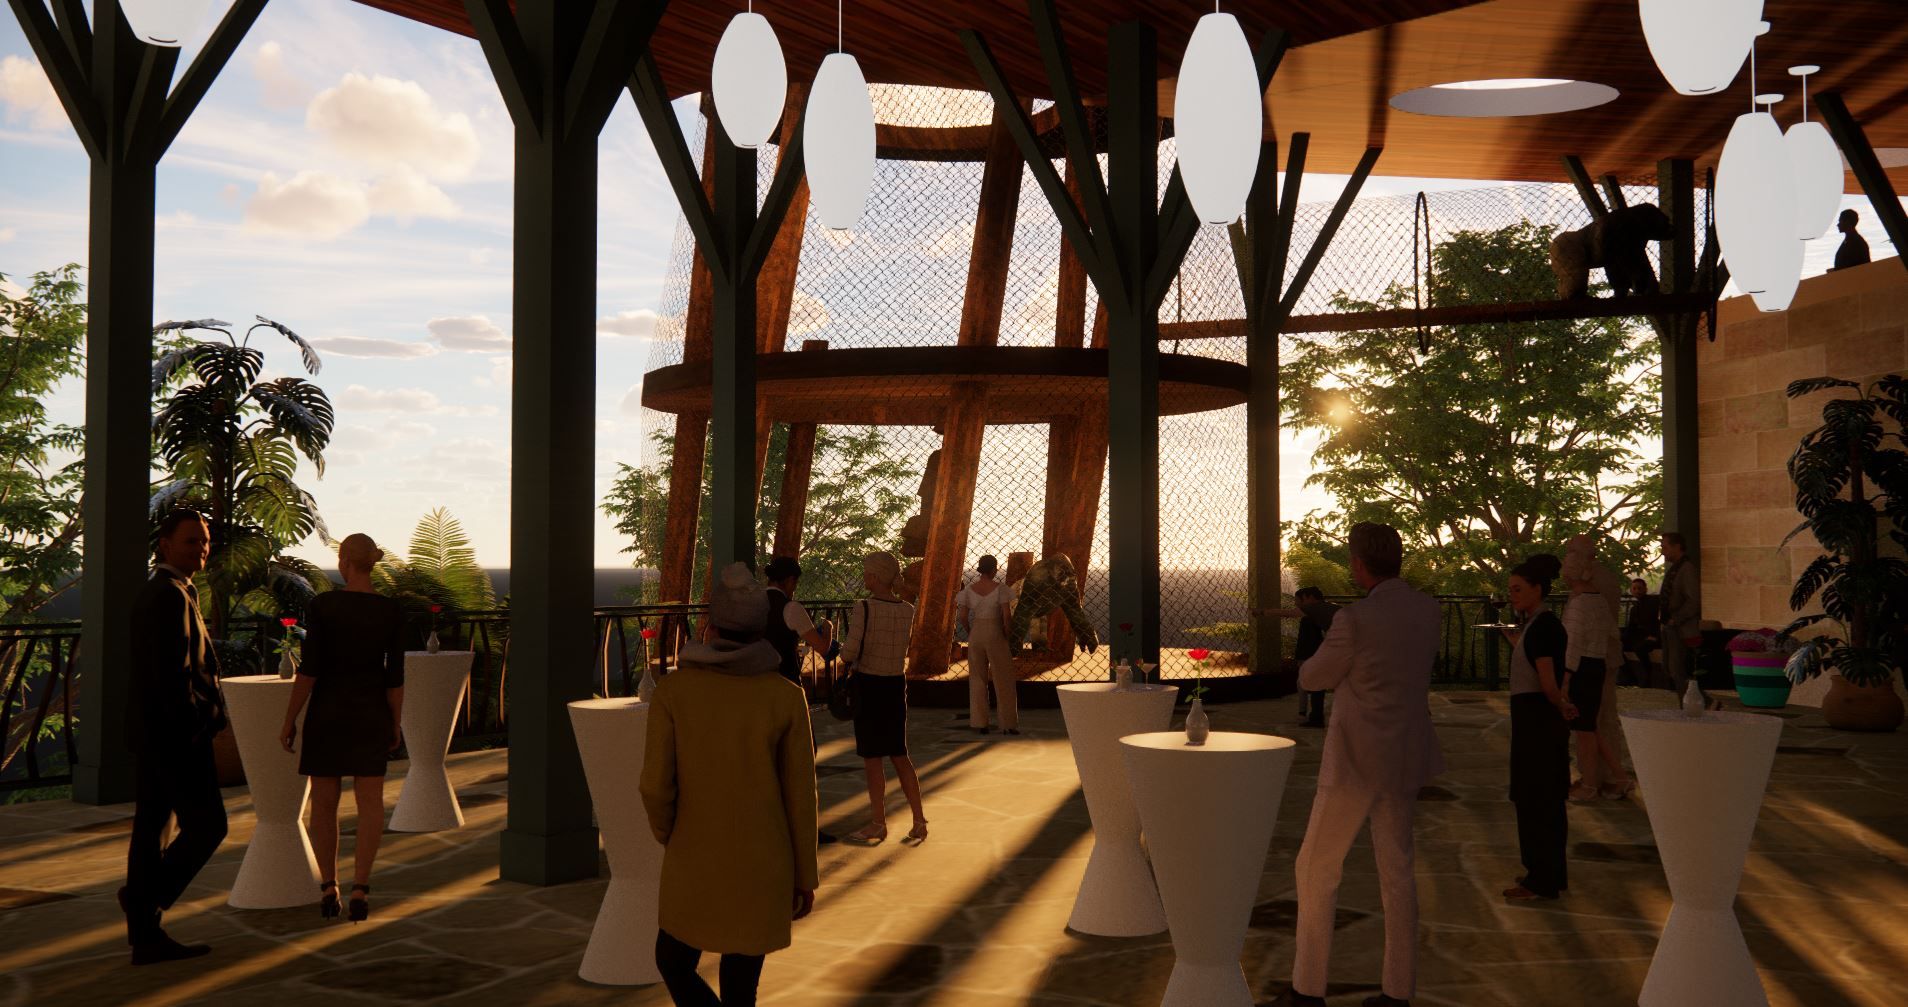 Rendering shows an interior view of the event space, looking towards the gorilla feature. 